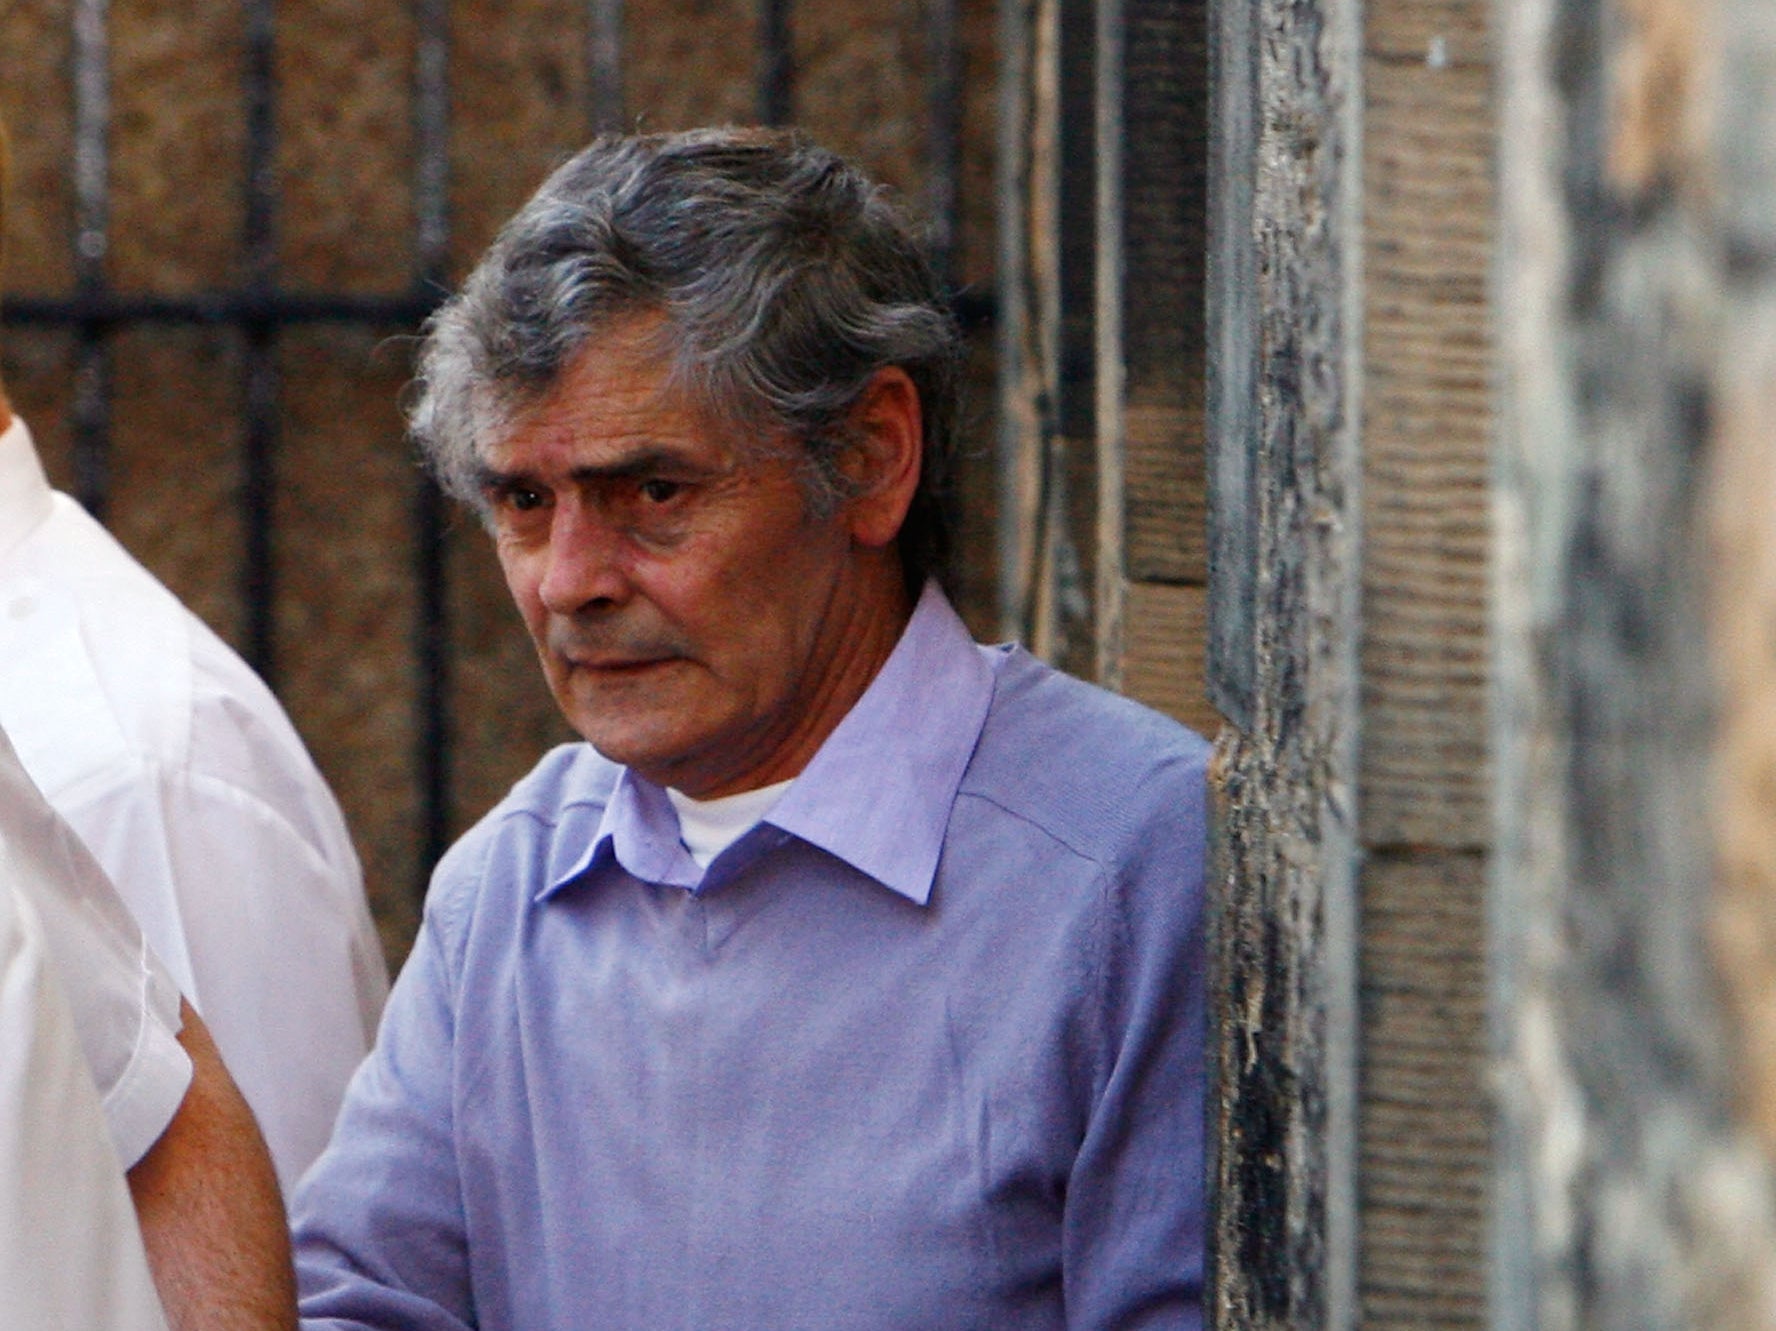 Peter Tobin has died while serving three life sentences